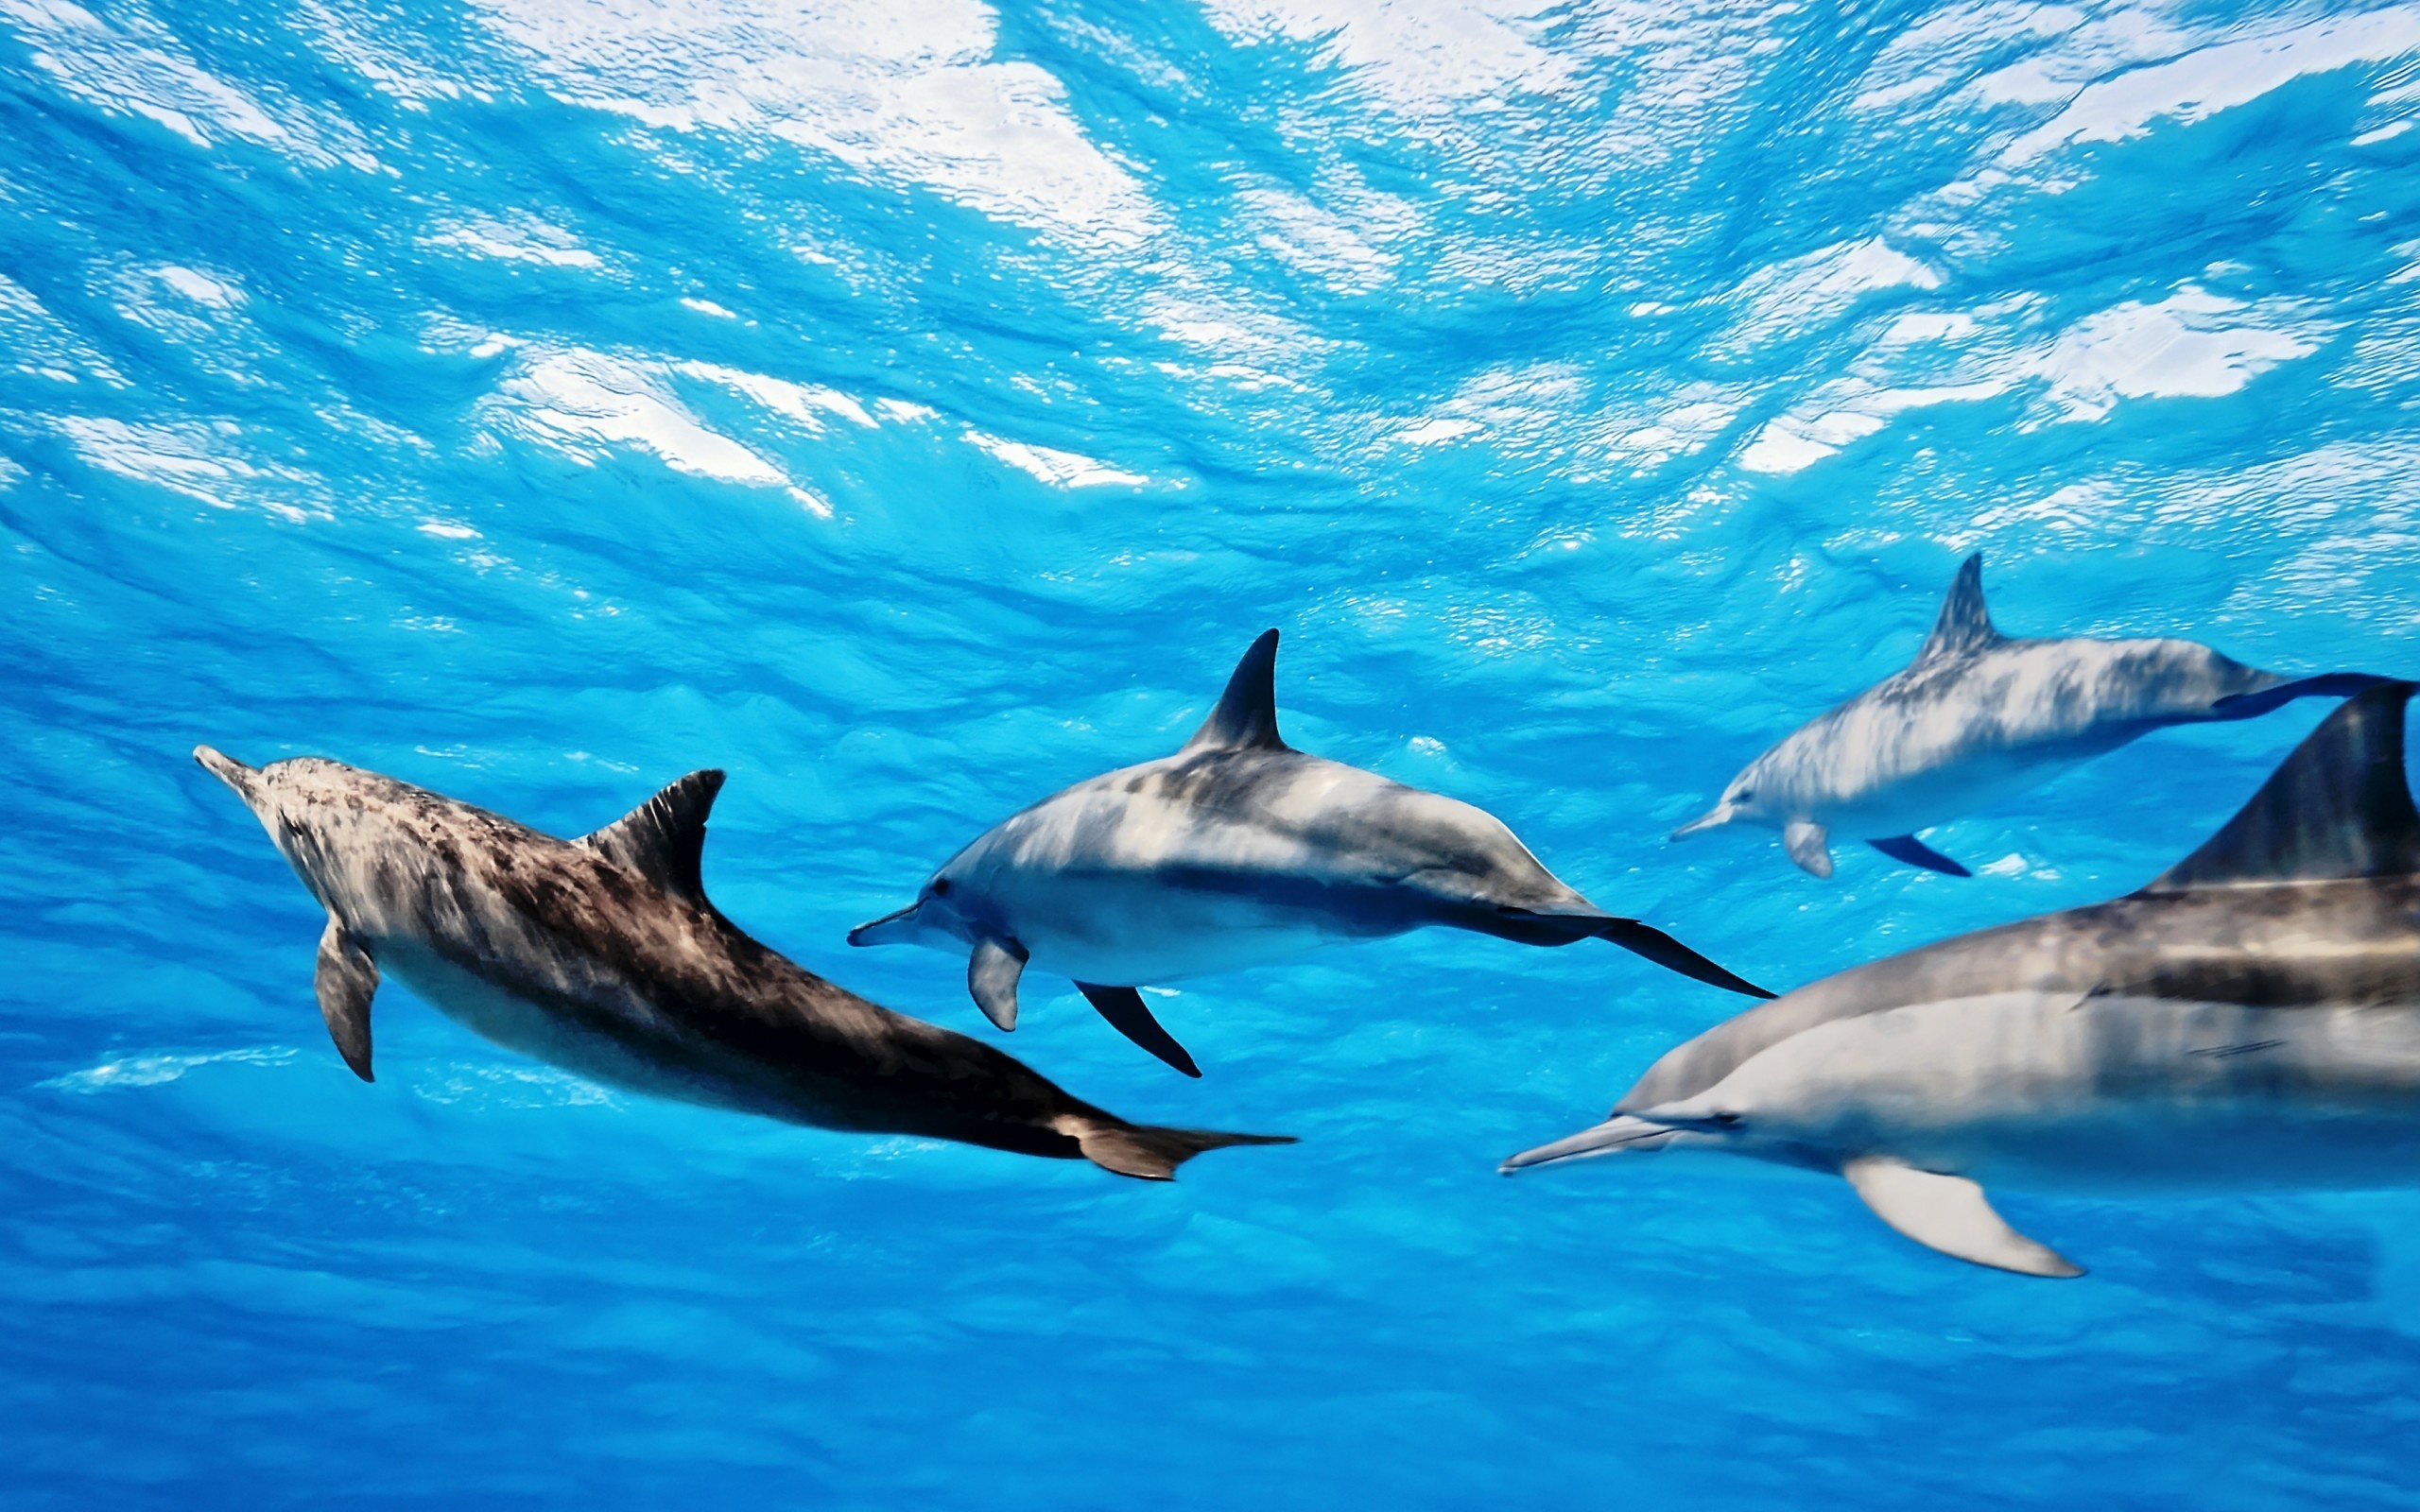 Dolphins - Dolphins Wallpaper (39486591) - Fanpop